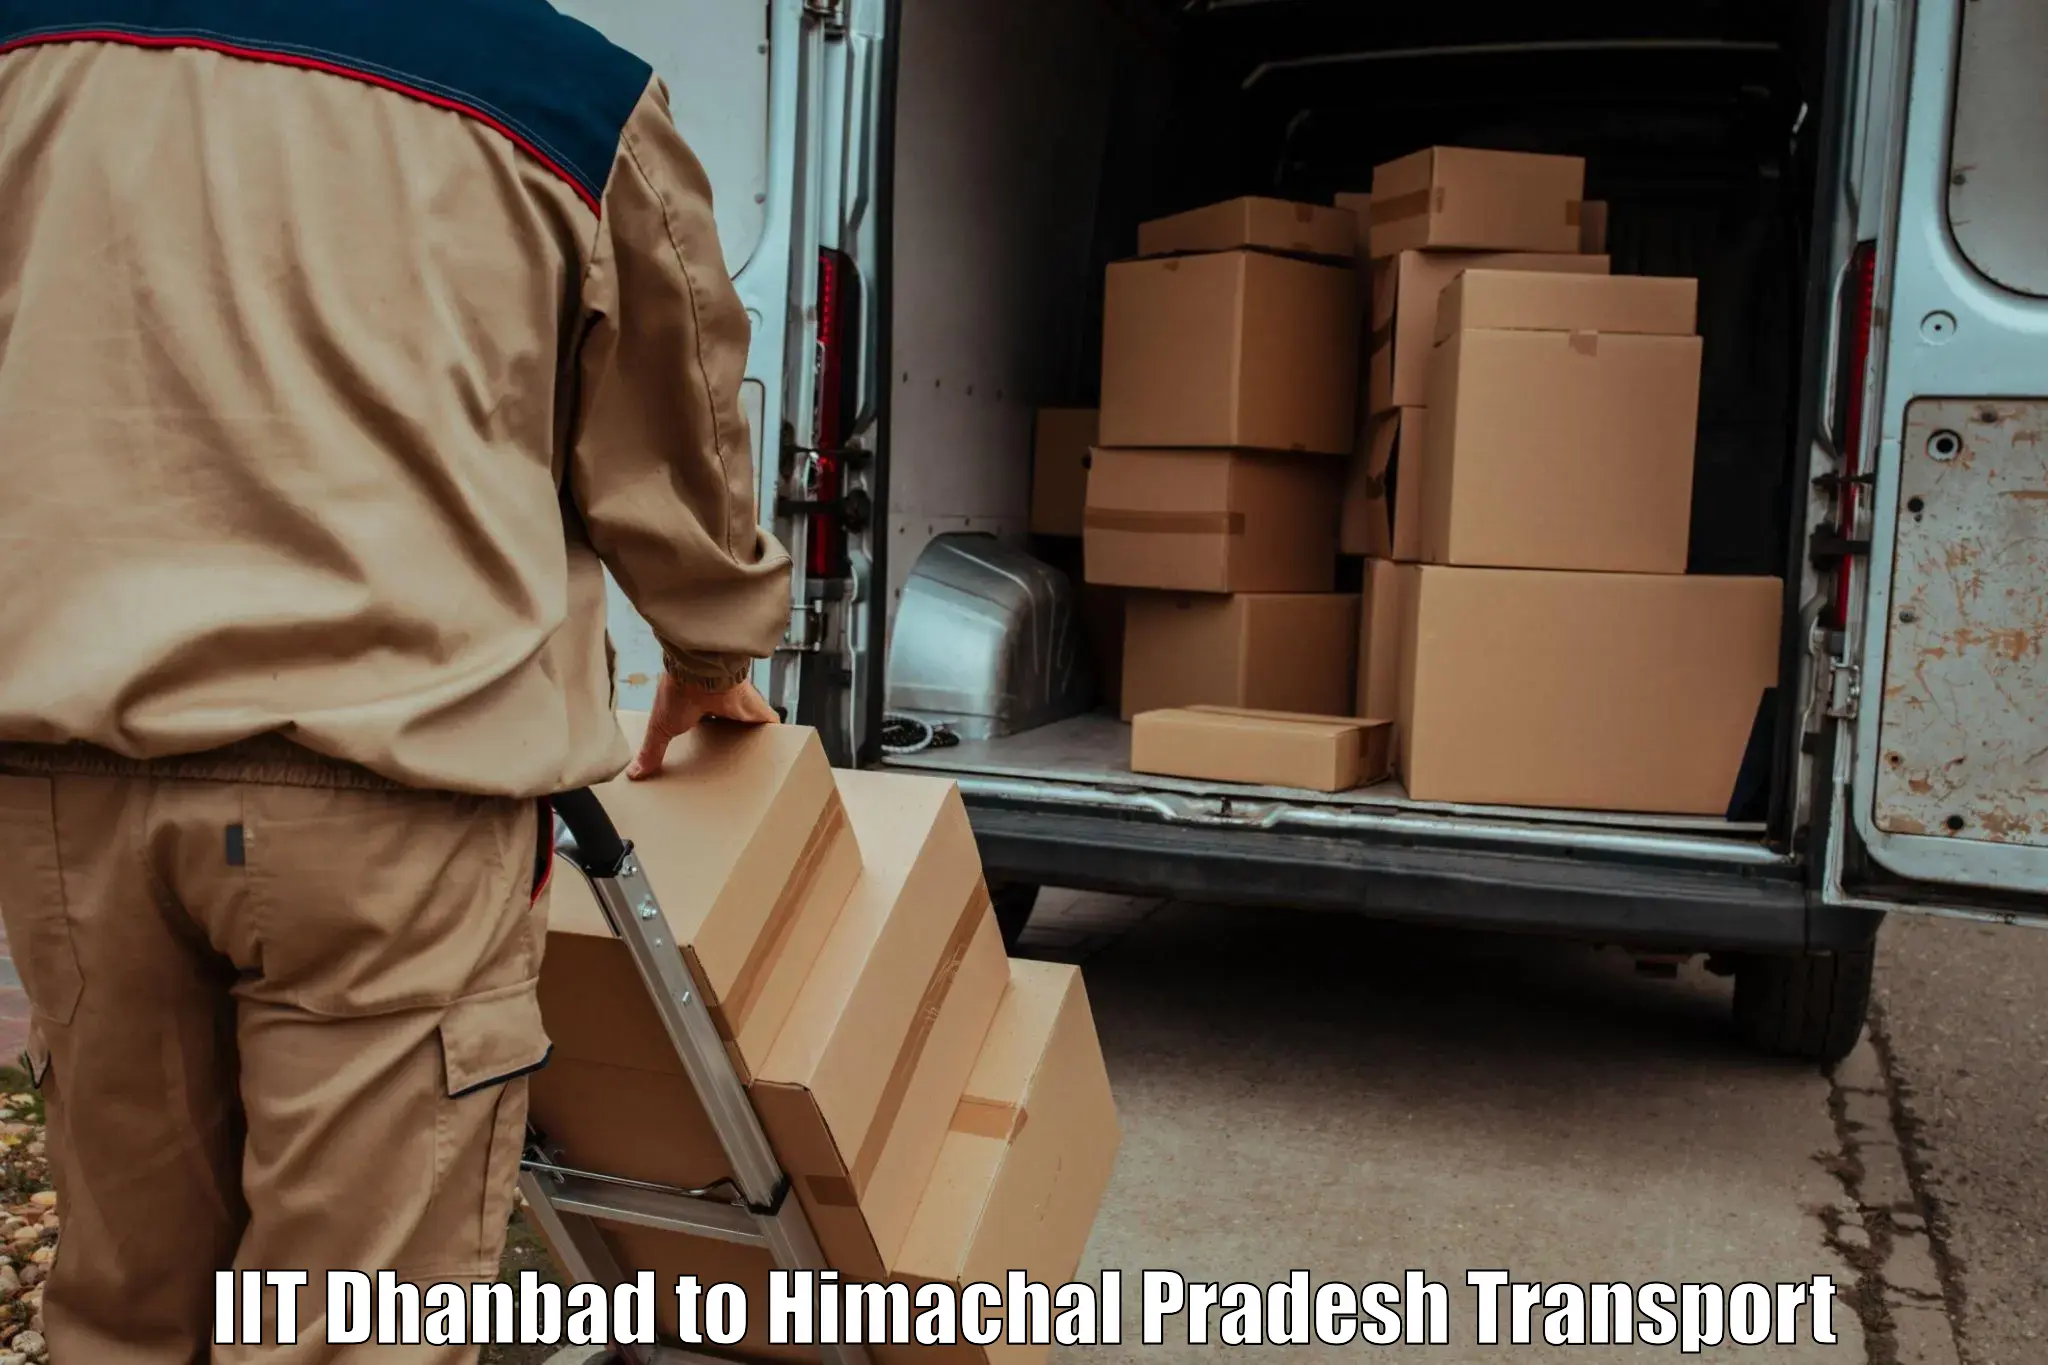 Commercial transport service IIT Dhanbad to Himachal Pradesh